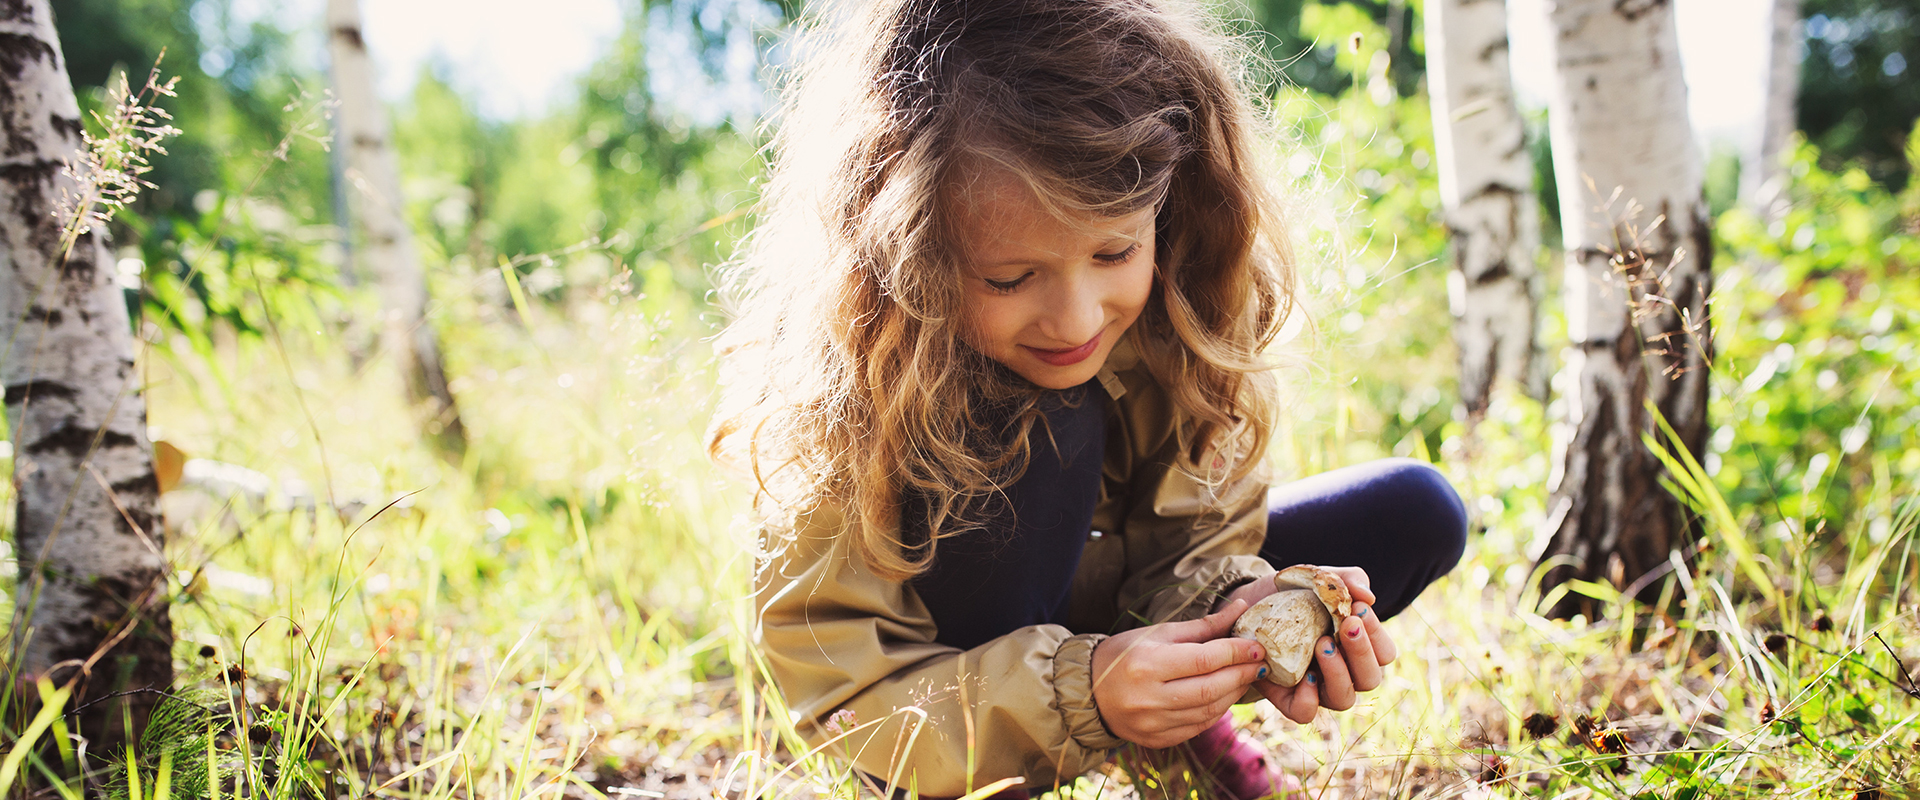 Girl picking wild mushrooms in a forest during summer.